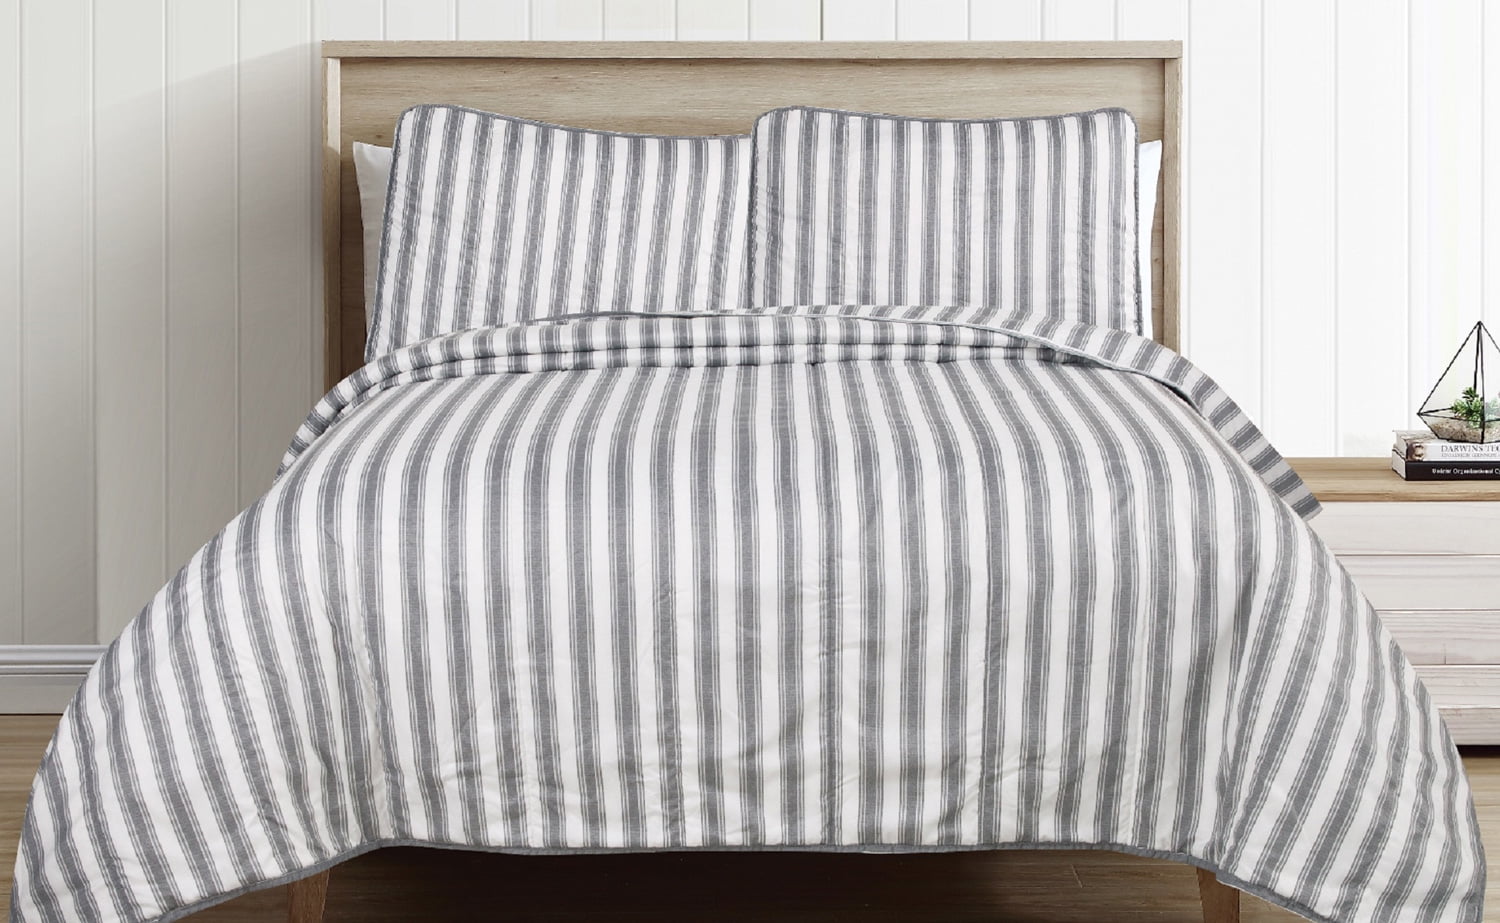 KING SHAM Ticking Stripe Rustic Fr Country 100% Cotton Hand Quilted Farmhouse 